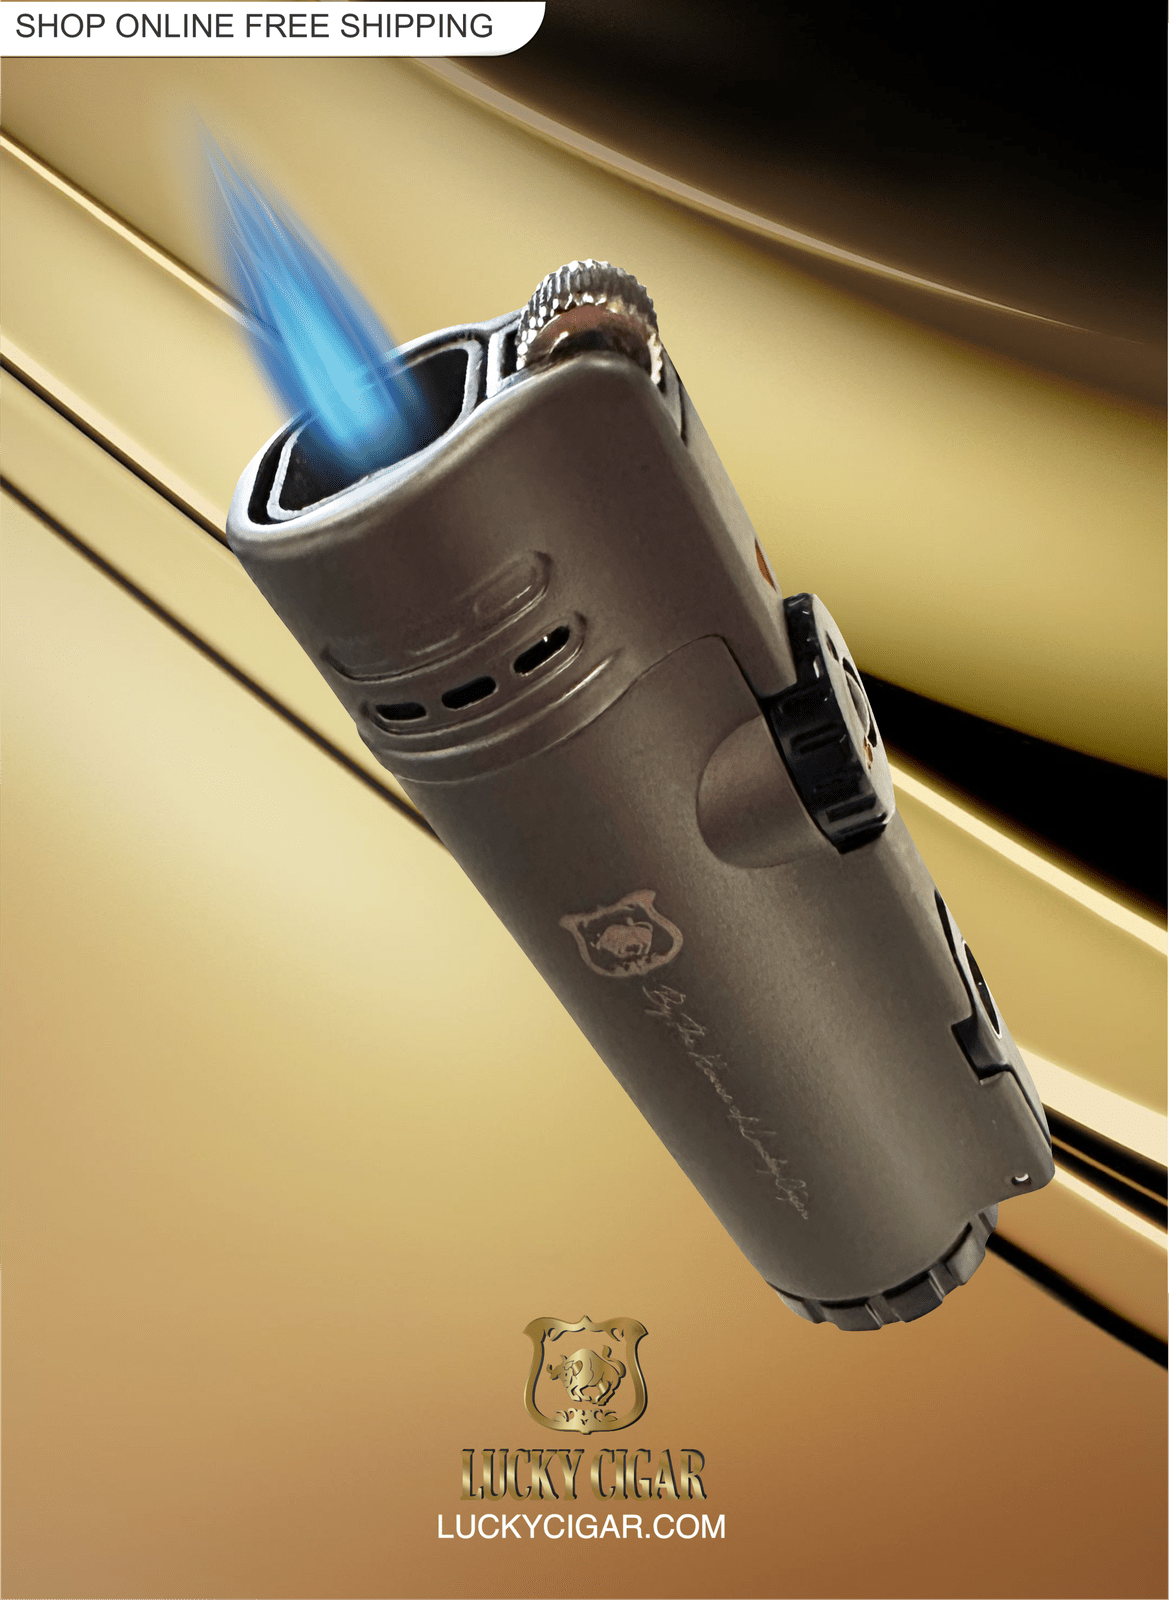 Cigar Lifestyle Accessories: Torch Lighter with Punch in Rugged Gray/Black